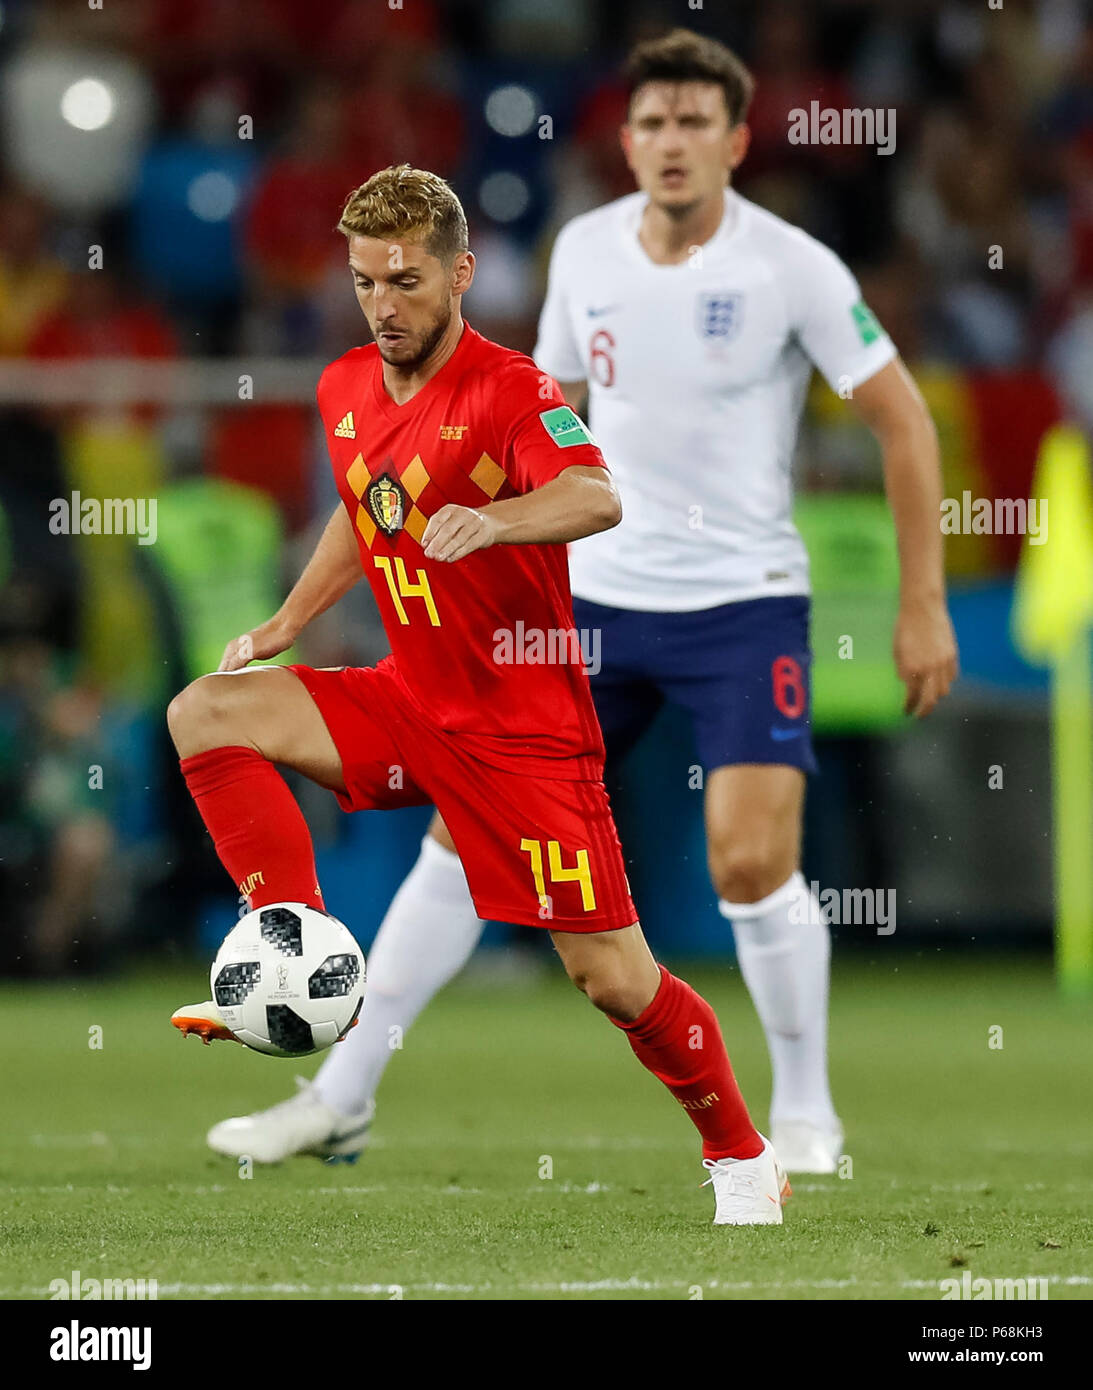 Kaliningrad, Russia. 28th June, 2018. Dries Mertens of Belgium during the 2018 FIFA World Cup Group G match between England and Belgium at Kaliningrad Stadium on June 28th 2018 in Kaliningrad, Russia. (Photo by Daniel Chesterton/) Credit: PHC Images/Alamy Live News Stock Photo